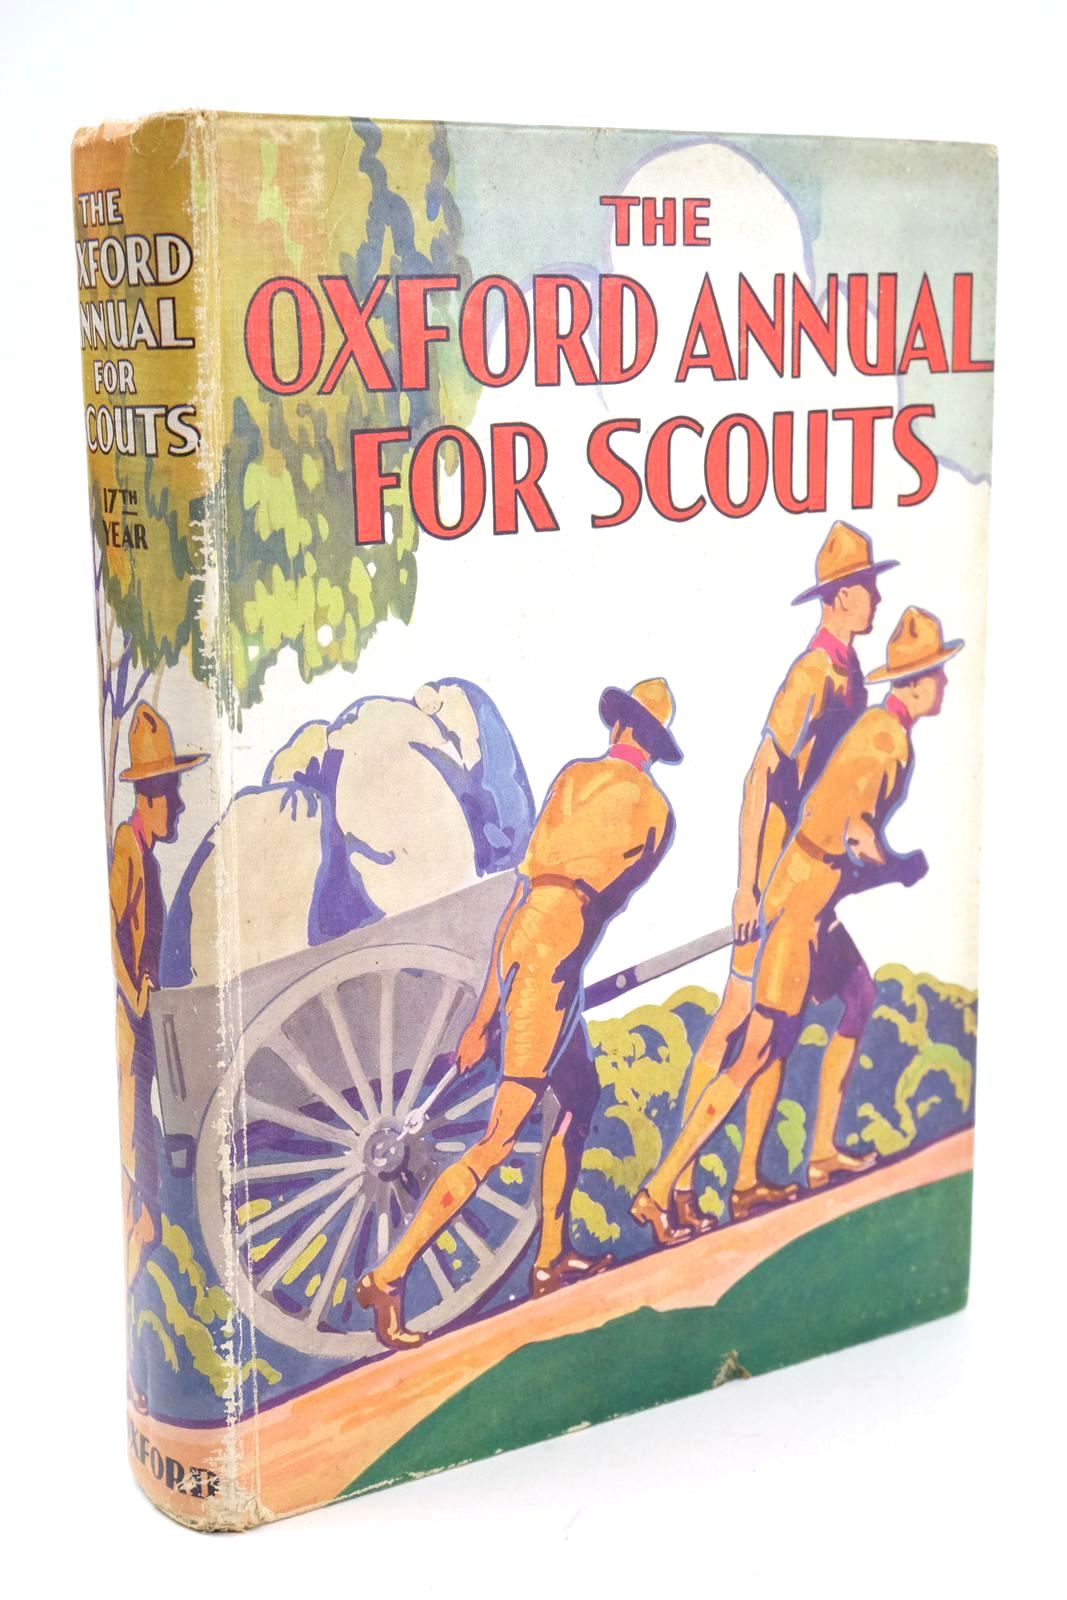 Photo of THE OXFORD ANNUAL FOR SCOUTS 17TH YEAR- Stock Number: 1324764